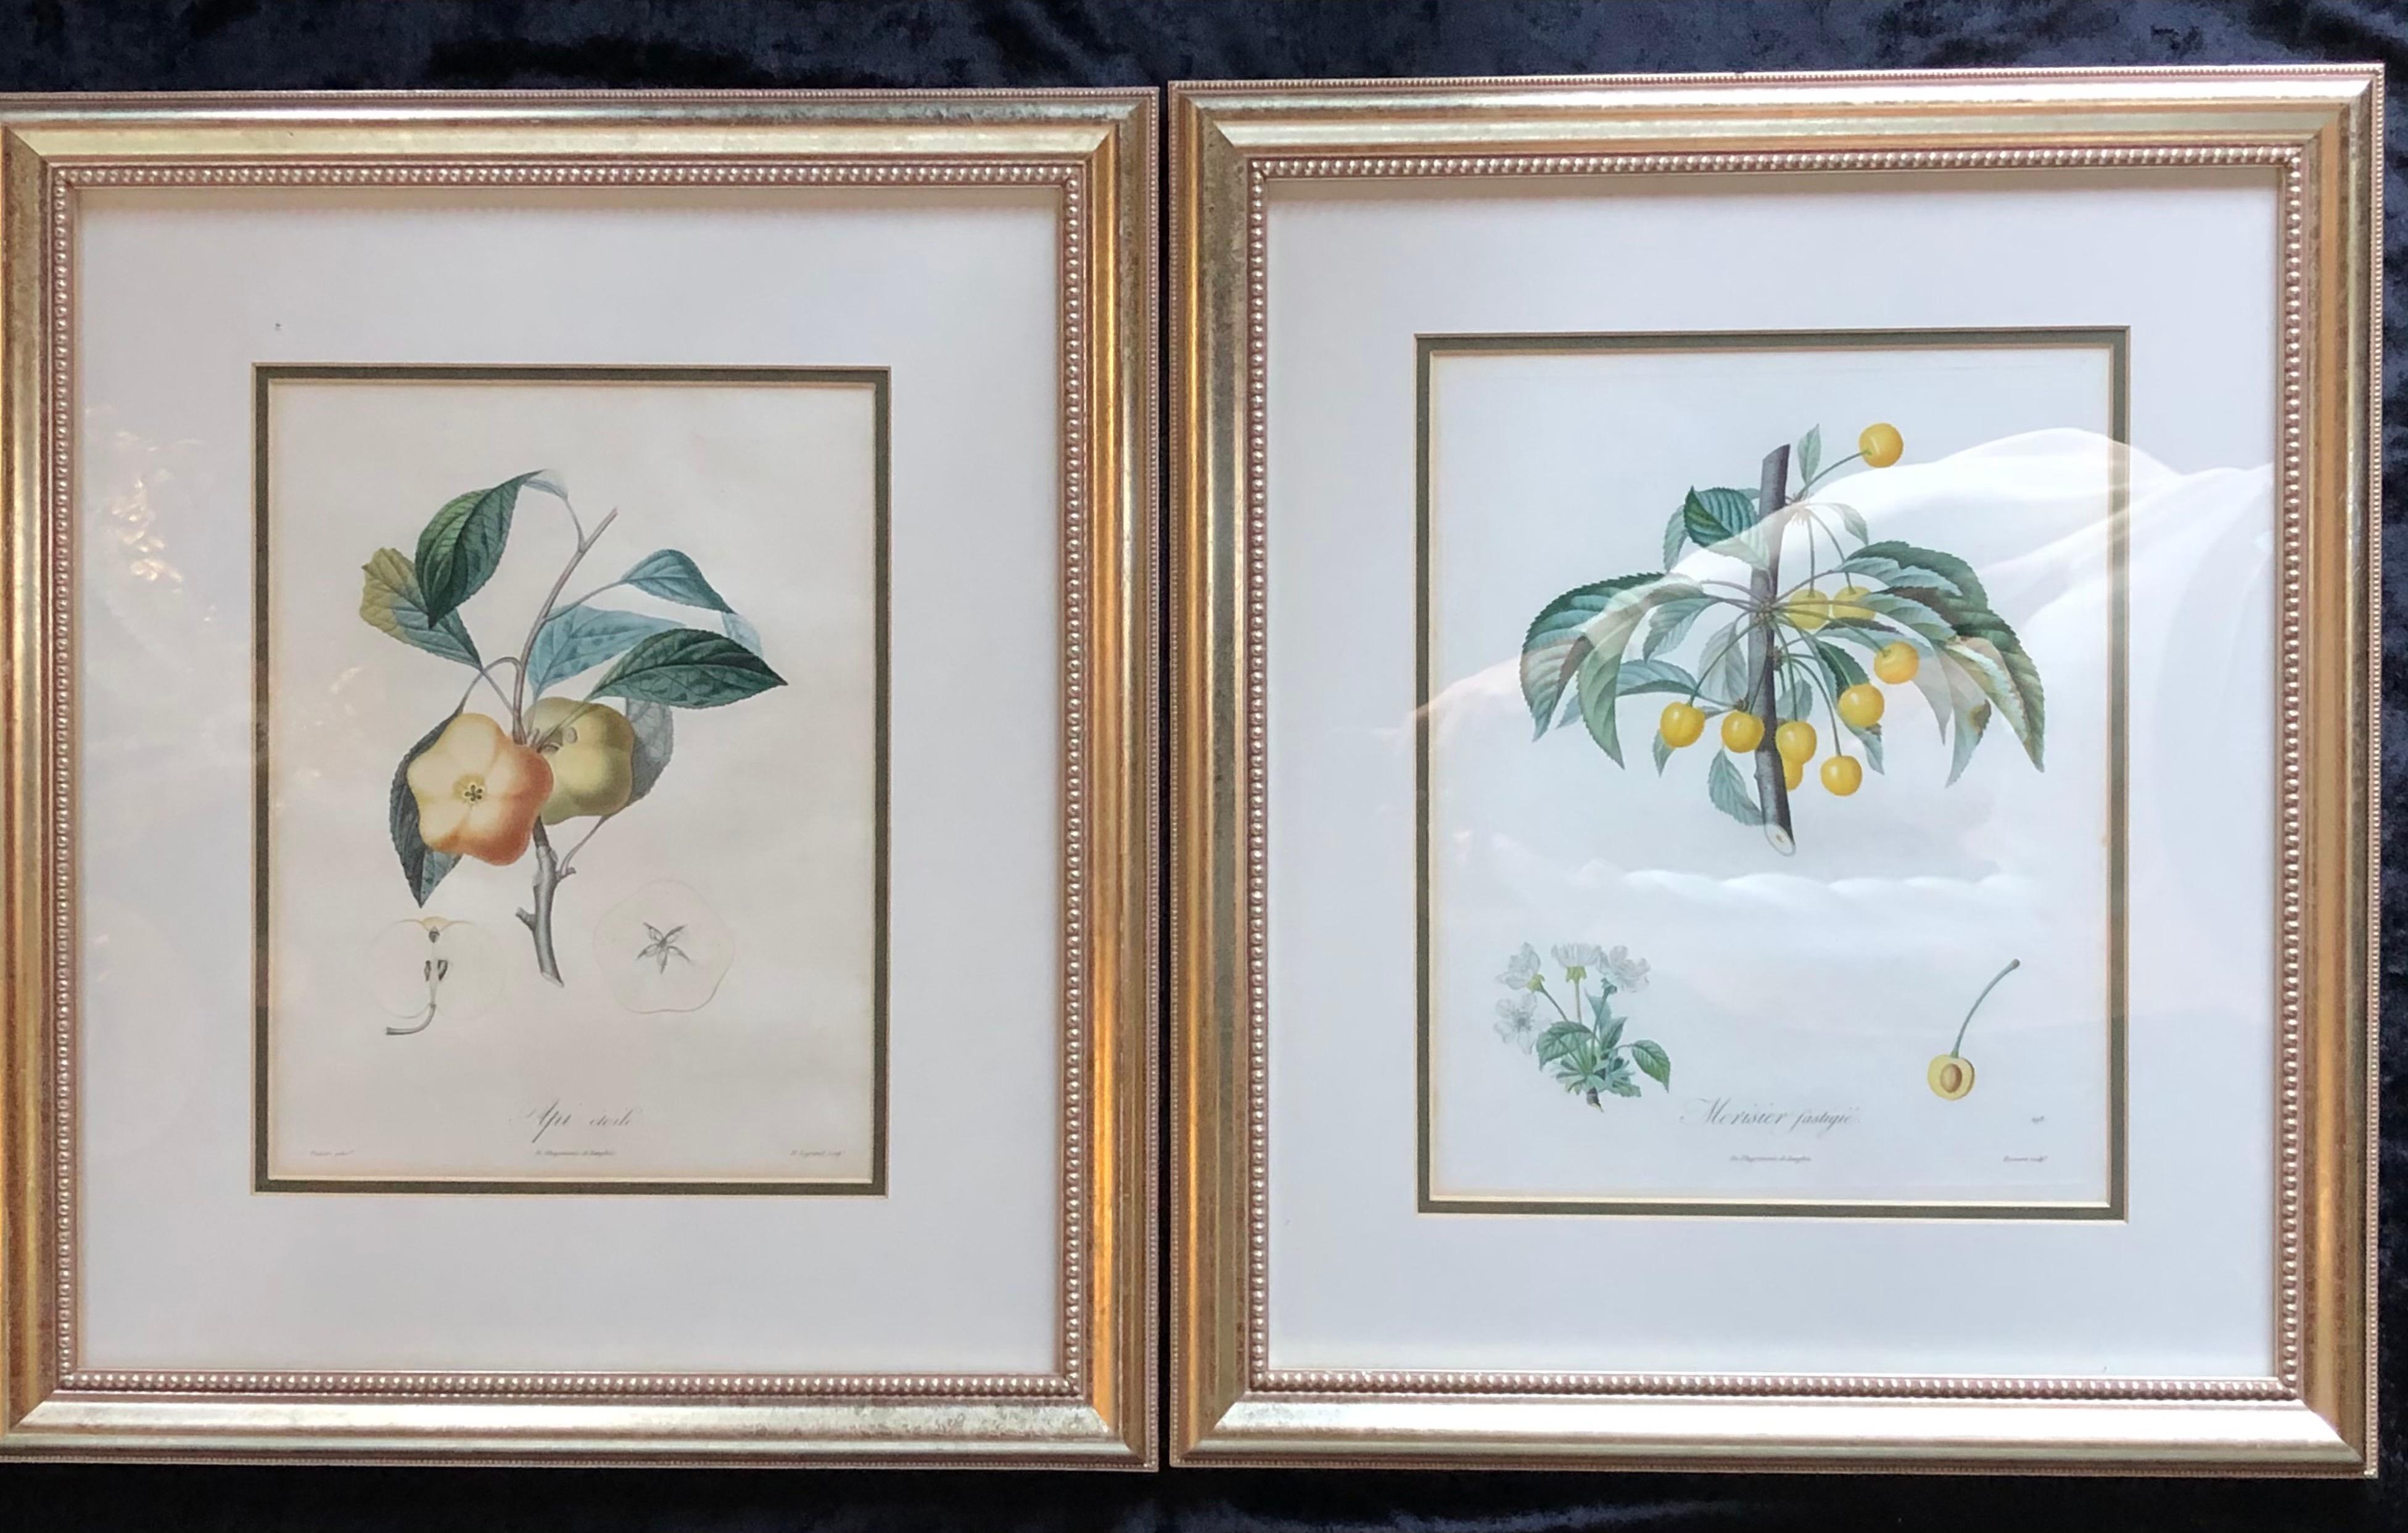 Ten hand-colored color stipple engravings from Traite des Arbres Fruitiers, with margins, each in a fine silver gilt custom frame. After Poiteau and Turpin Studies of Fruit. If your goal is to fill the wall with great design, this is your